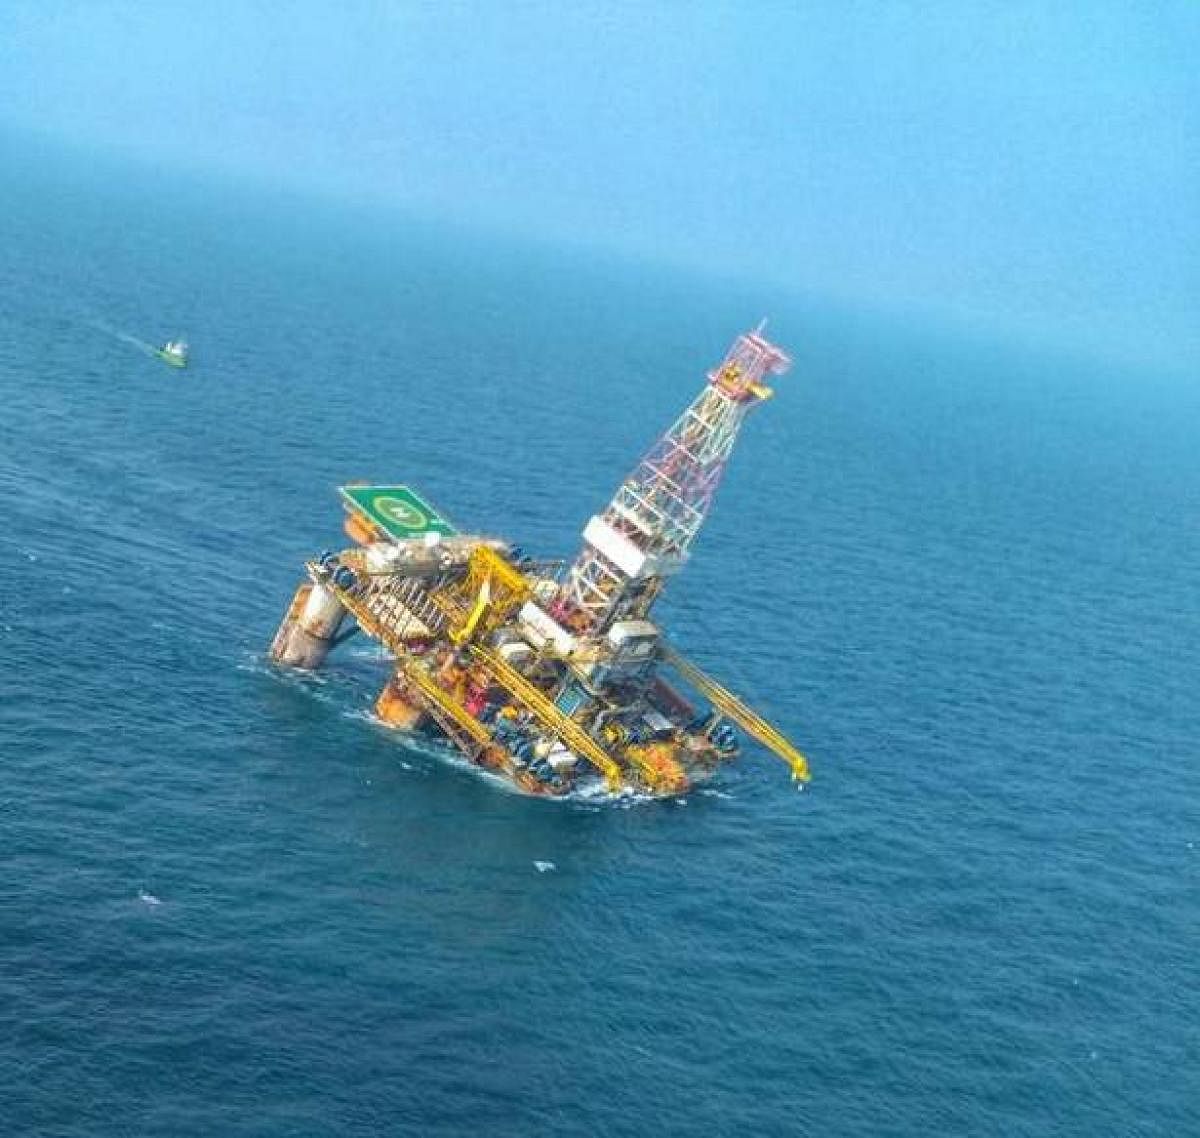 Navy saves 13 from tilting ONGC rig off Andhra coast